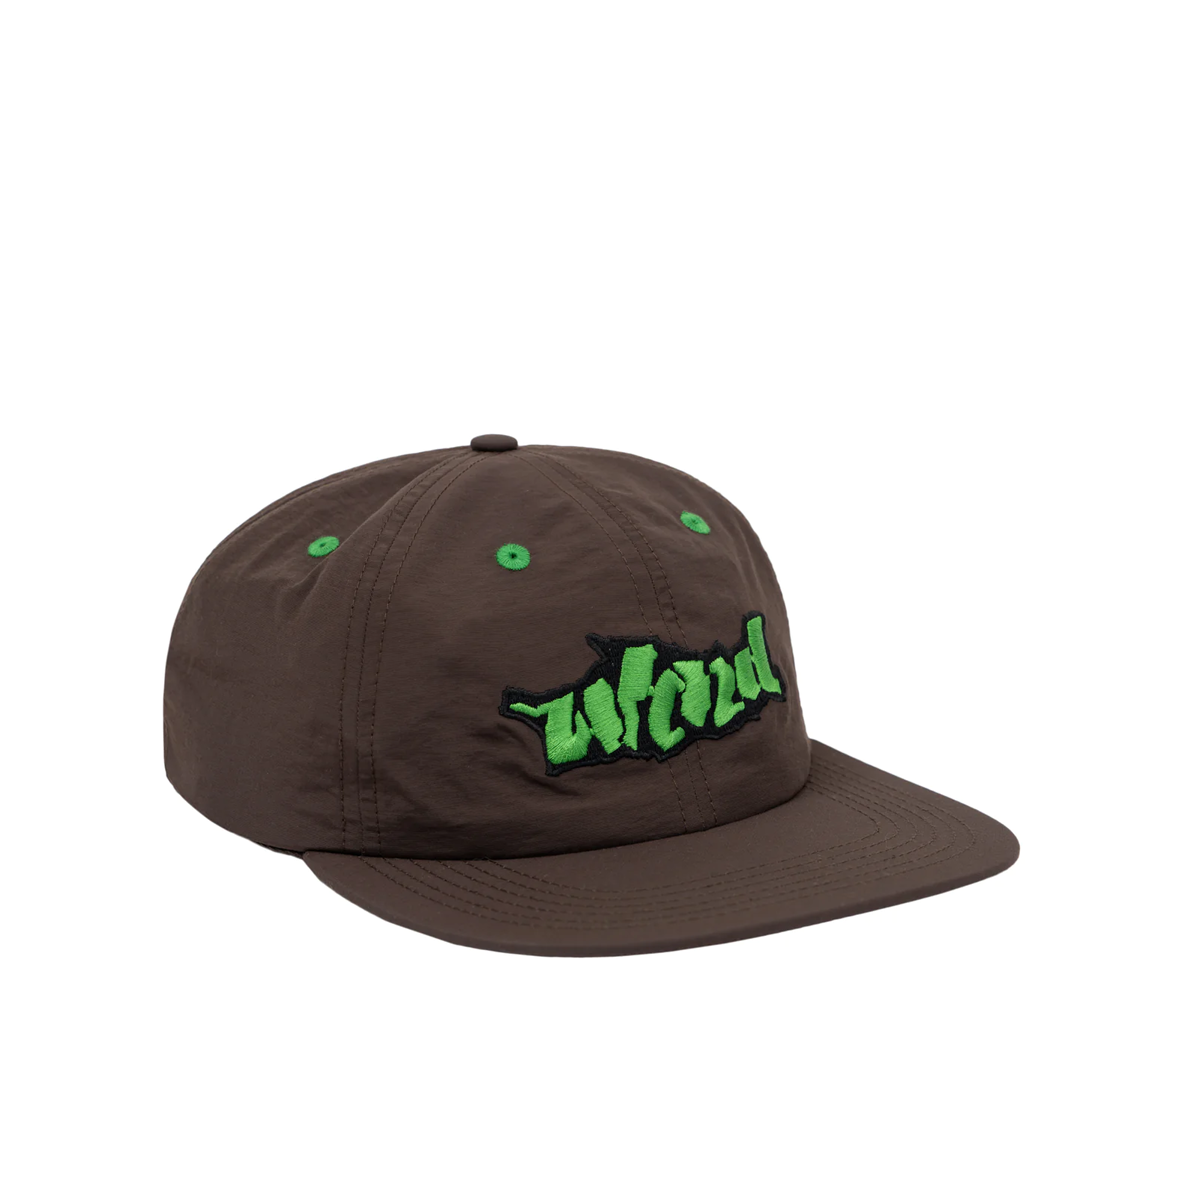 WKND Behold Snapback Hat - Assorted Colors